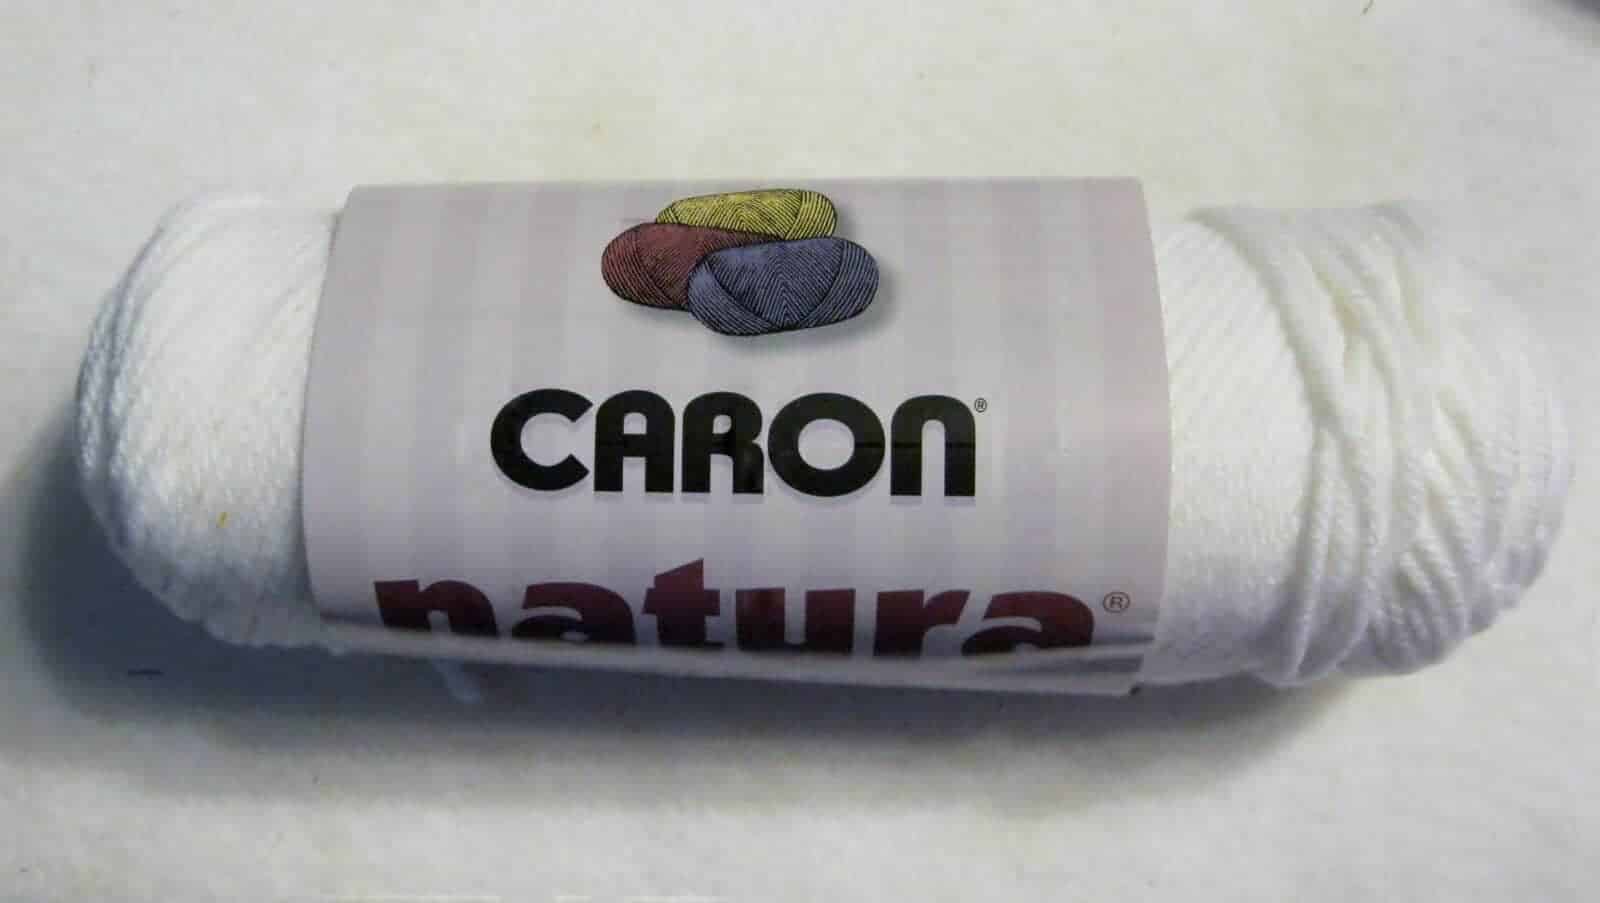 6 SKEINS of WHITE CARON NATURA WORSTED WEIGHT ACRYLIC YARN - 954 YDS -  Chappy's Fiber Arts and Crafts